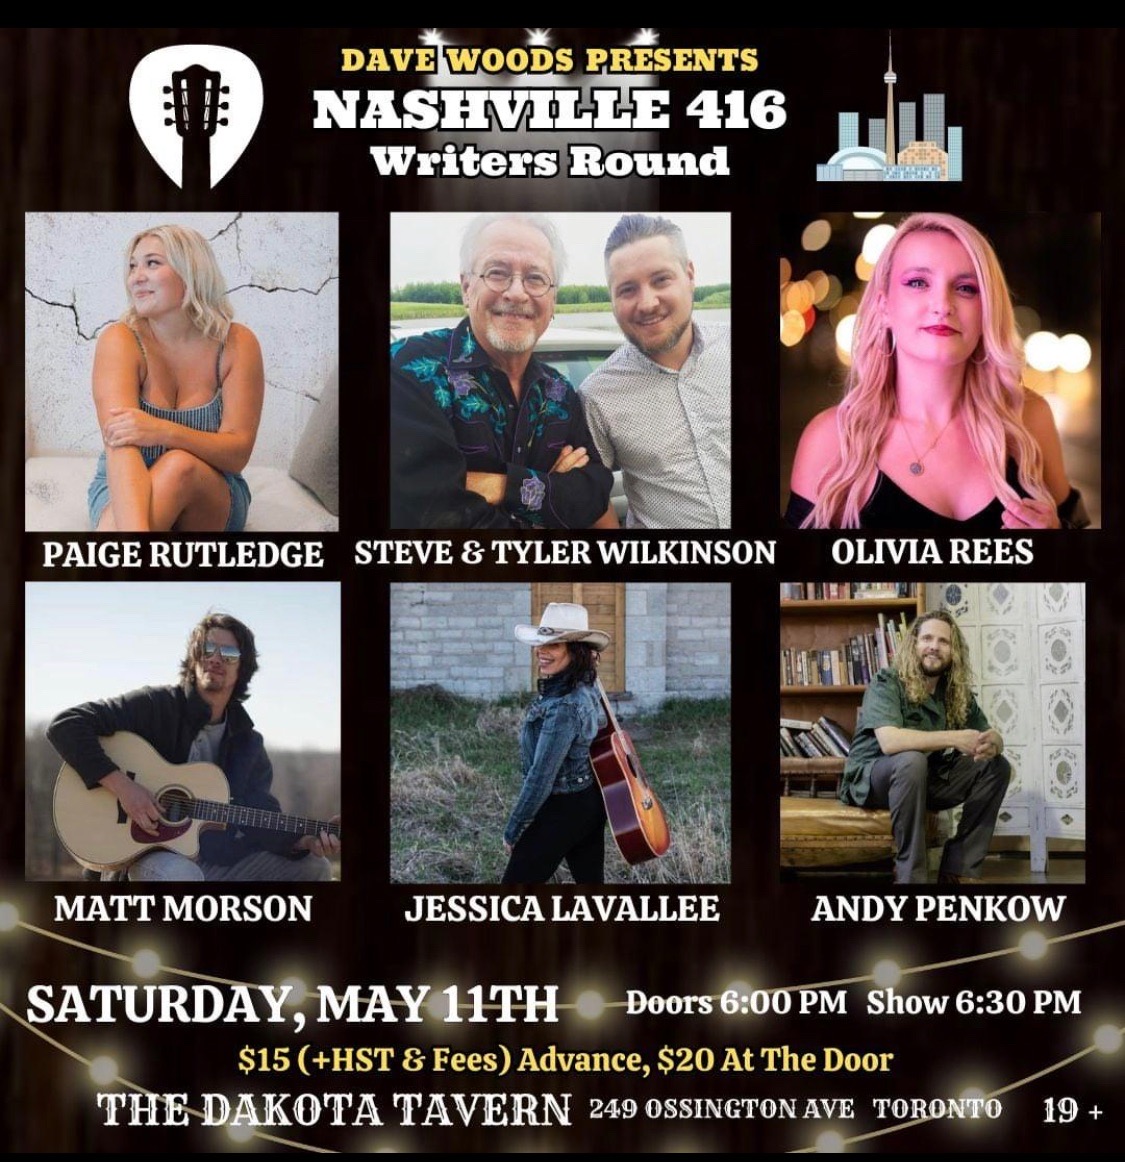 🎶 Save the date, Toronto! 🎶 Calling all music lovers to join us for Nashville writers’ round. Get ready for a night of incredible talent. It’s going to be epic! 🎵🌟 #NashvilleInToronto #MusicEvent #SaveTheDate 🙏🏻 @inthecountry_with_davewoods @thedakotatavern